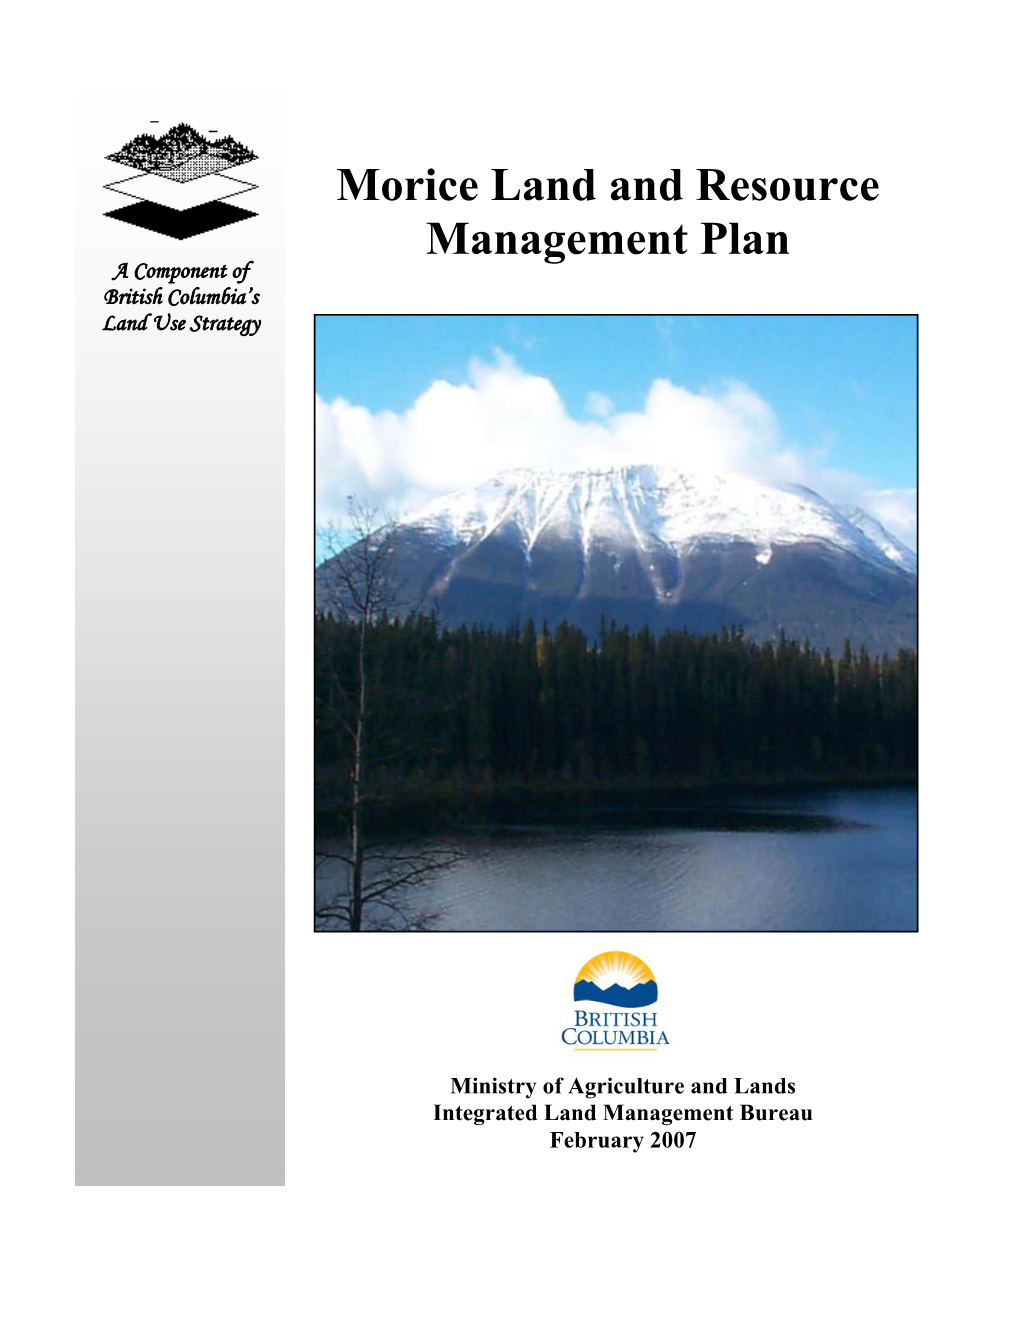 Morice LRMP Is Consistent with Provincial Government Policy for Land Use Planning and the New Relationship Between the Province of BC and First Nations